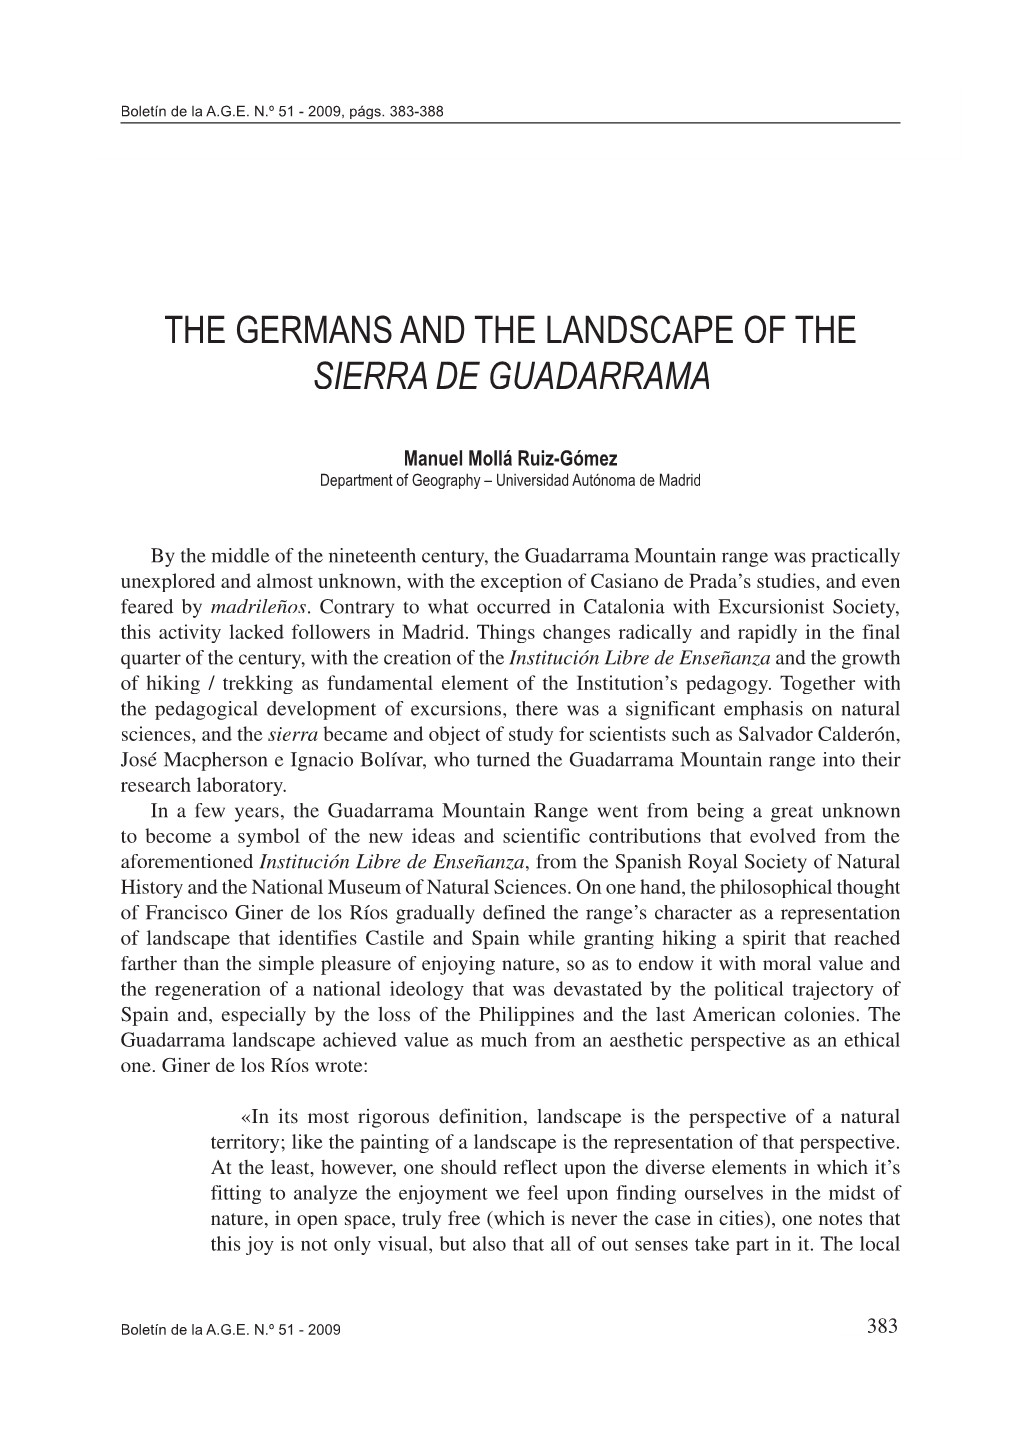 The Germans and the Landscape of the Sierra De Guadarrama